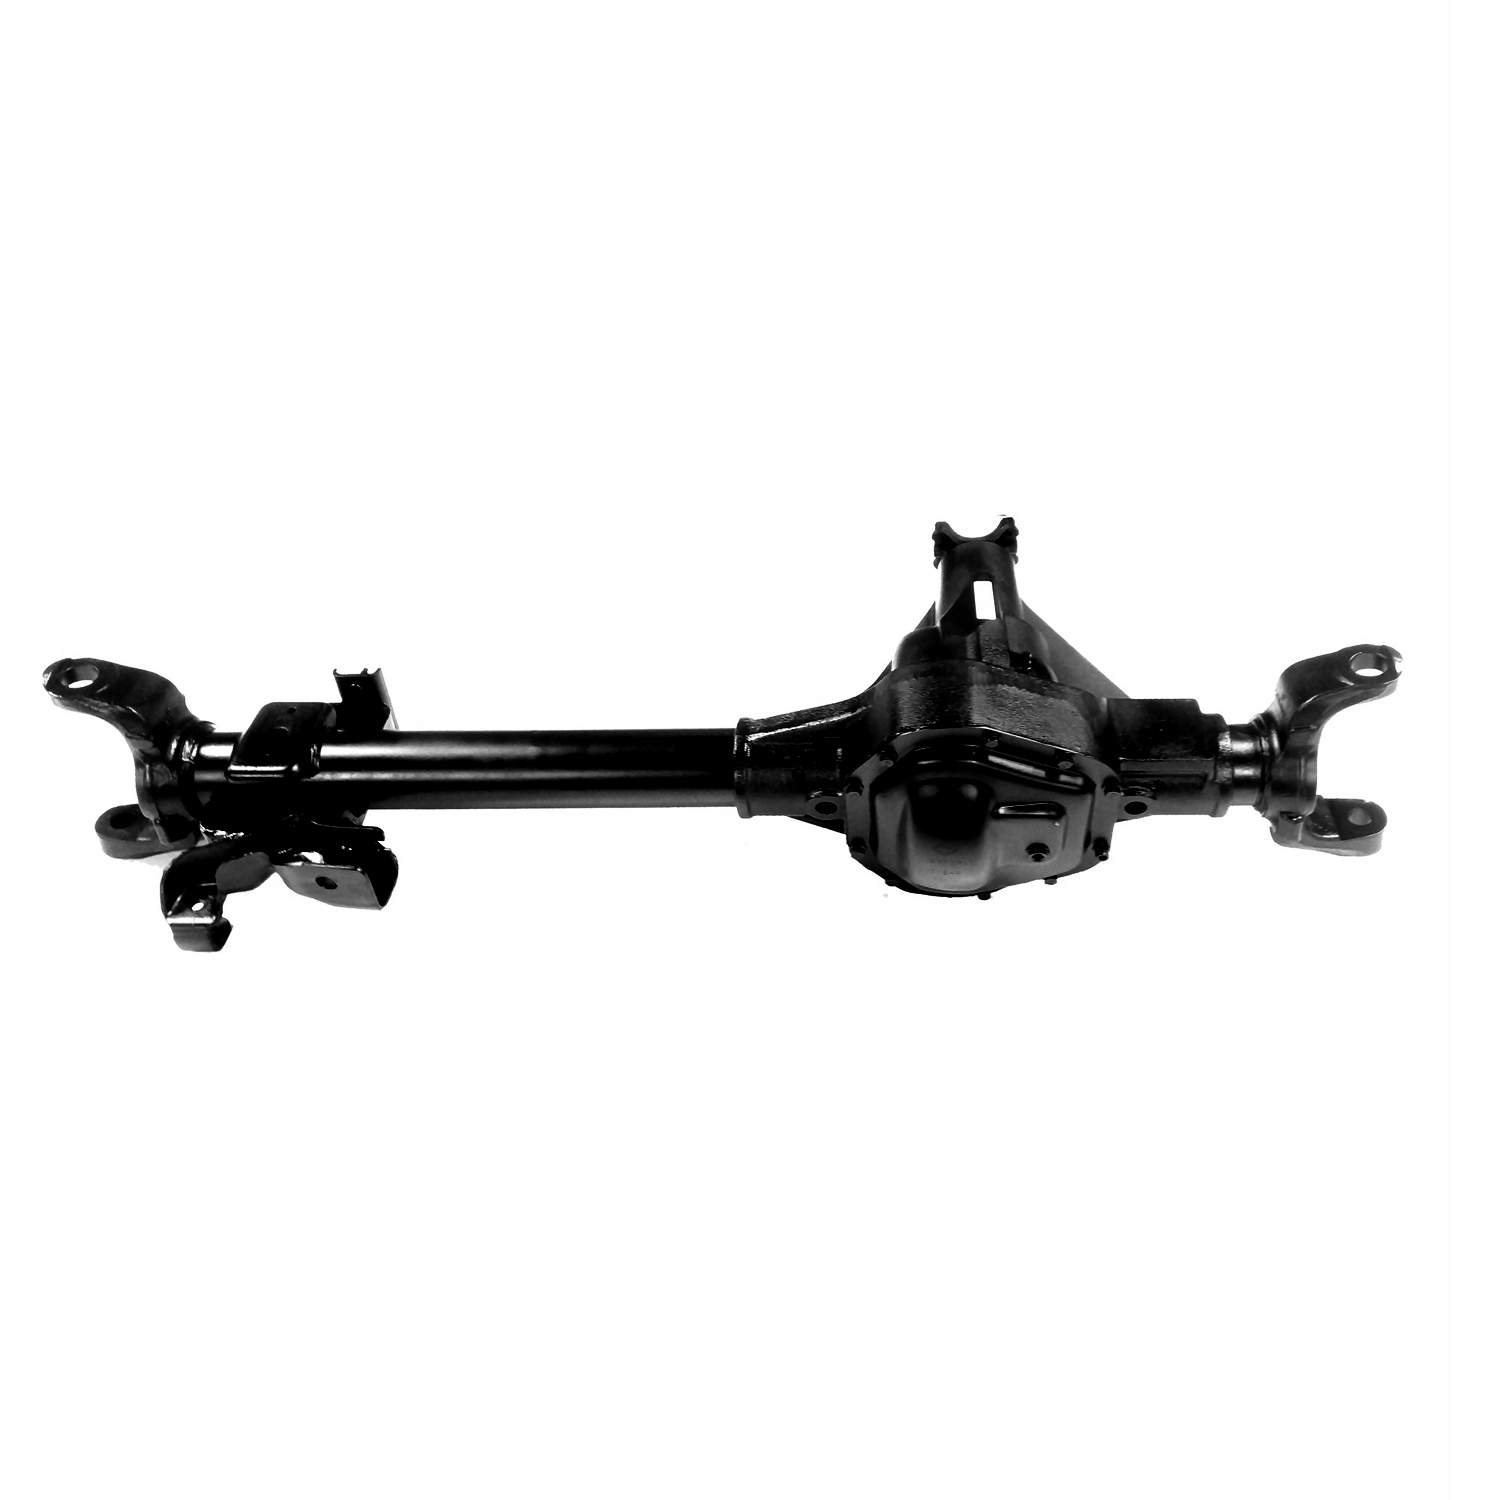 Reman Axle Assembly for Dana 60 11-12 Ford F250 4.3